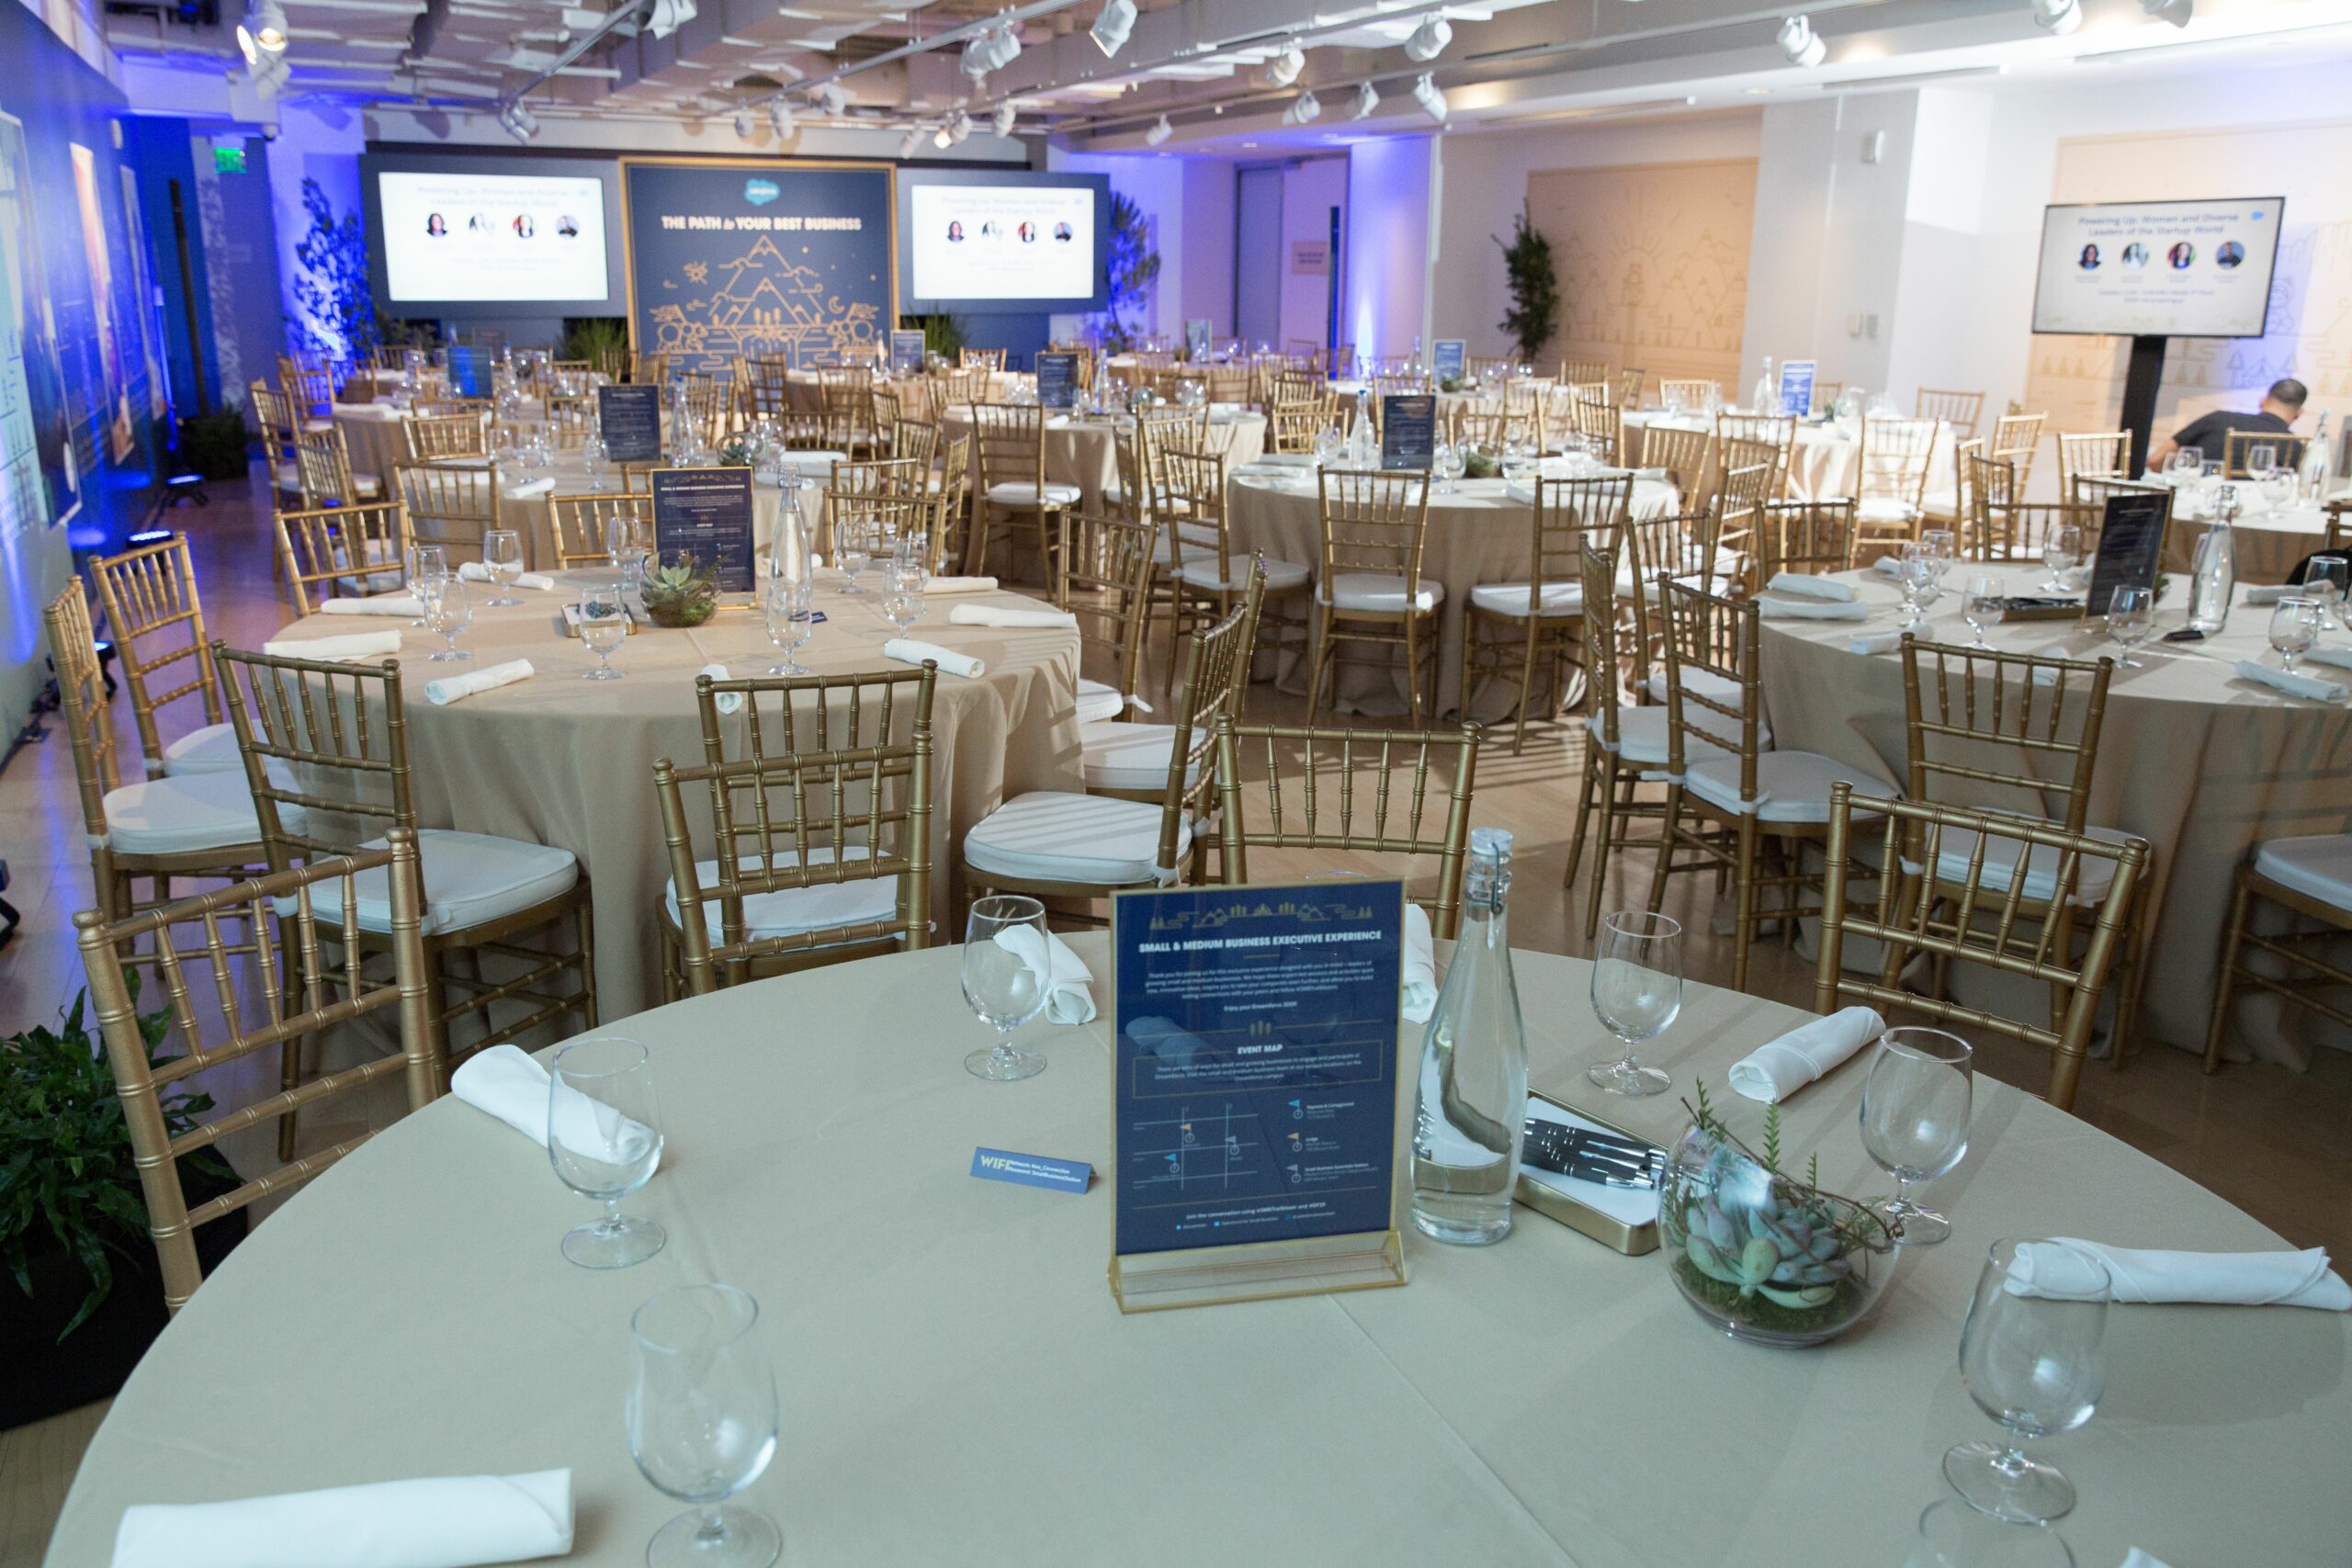 Large room with tables and chairs set up for a Salesforce event